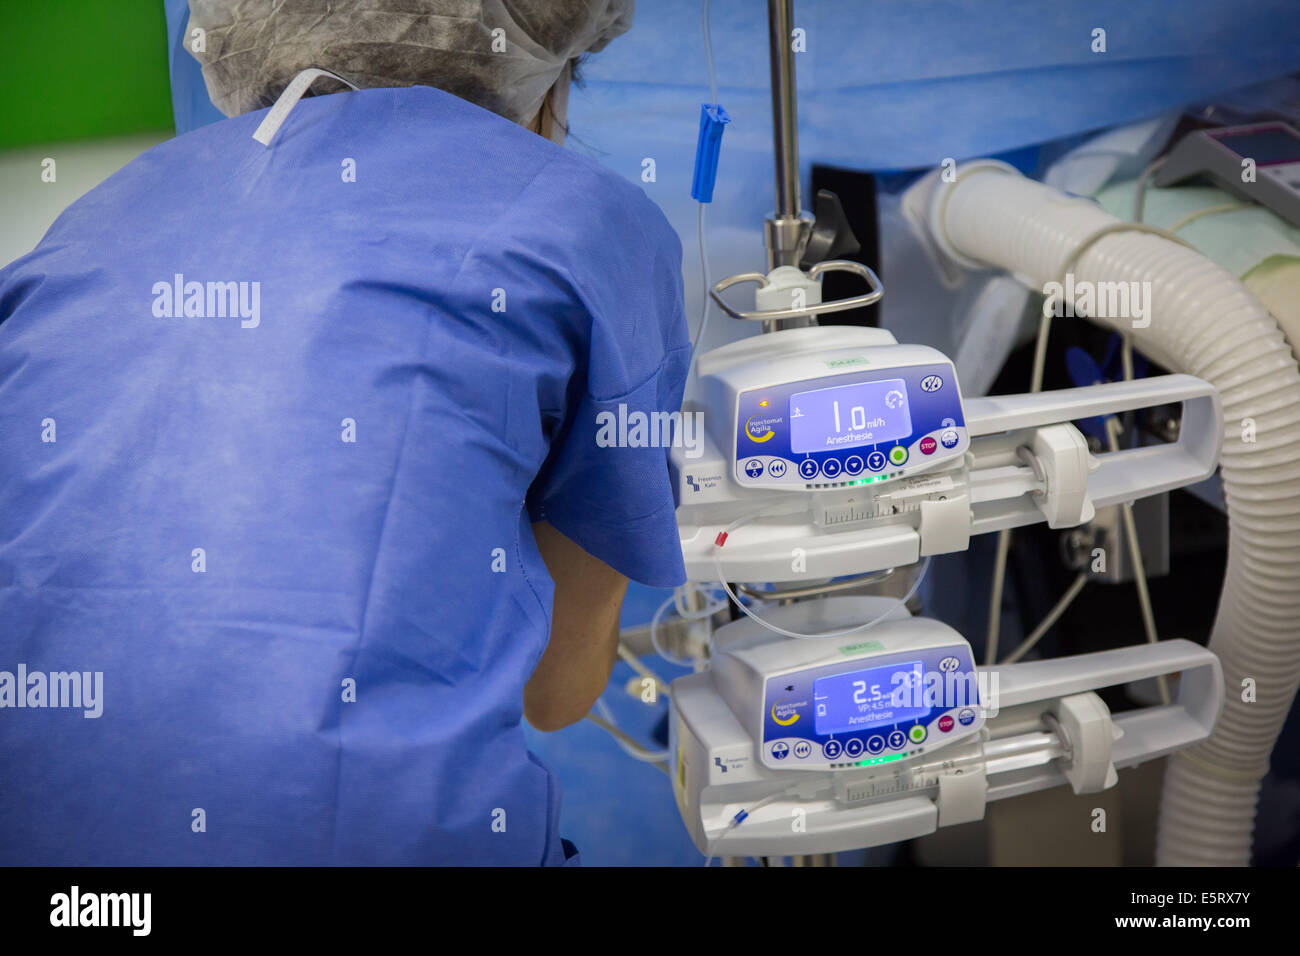 Anesthesia issued by a pump. Stock Photo